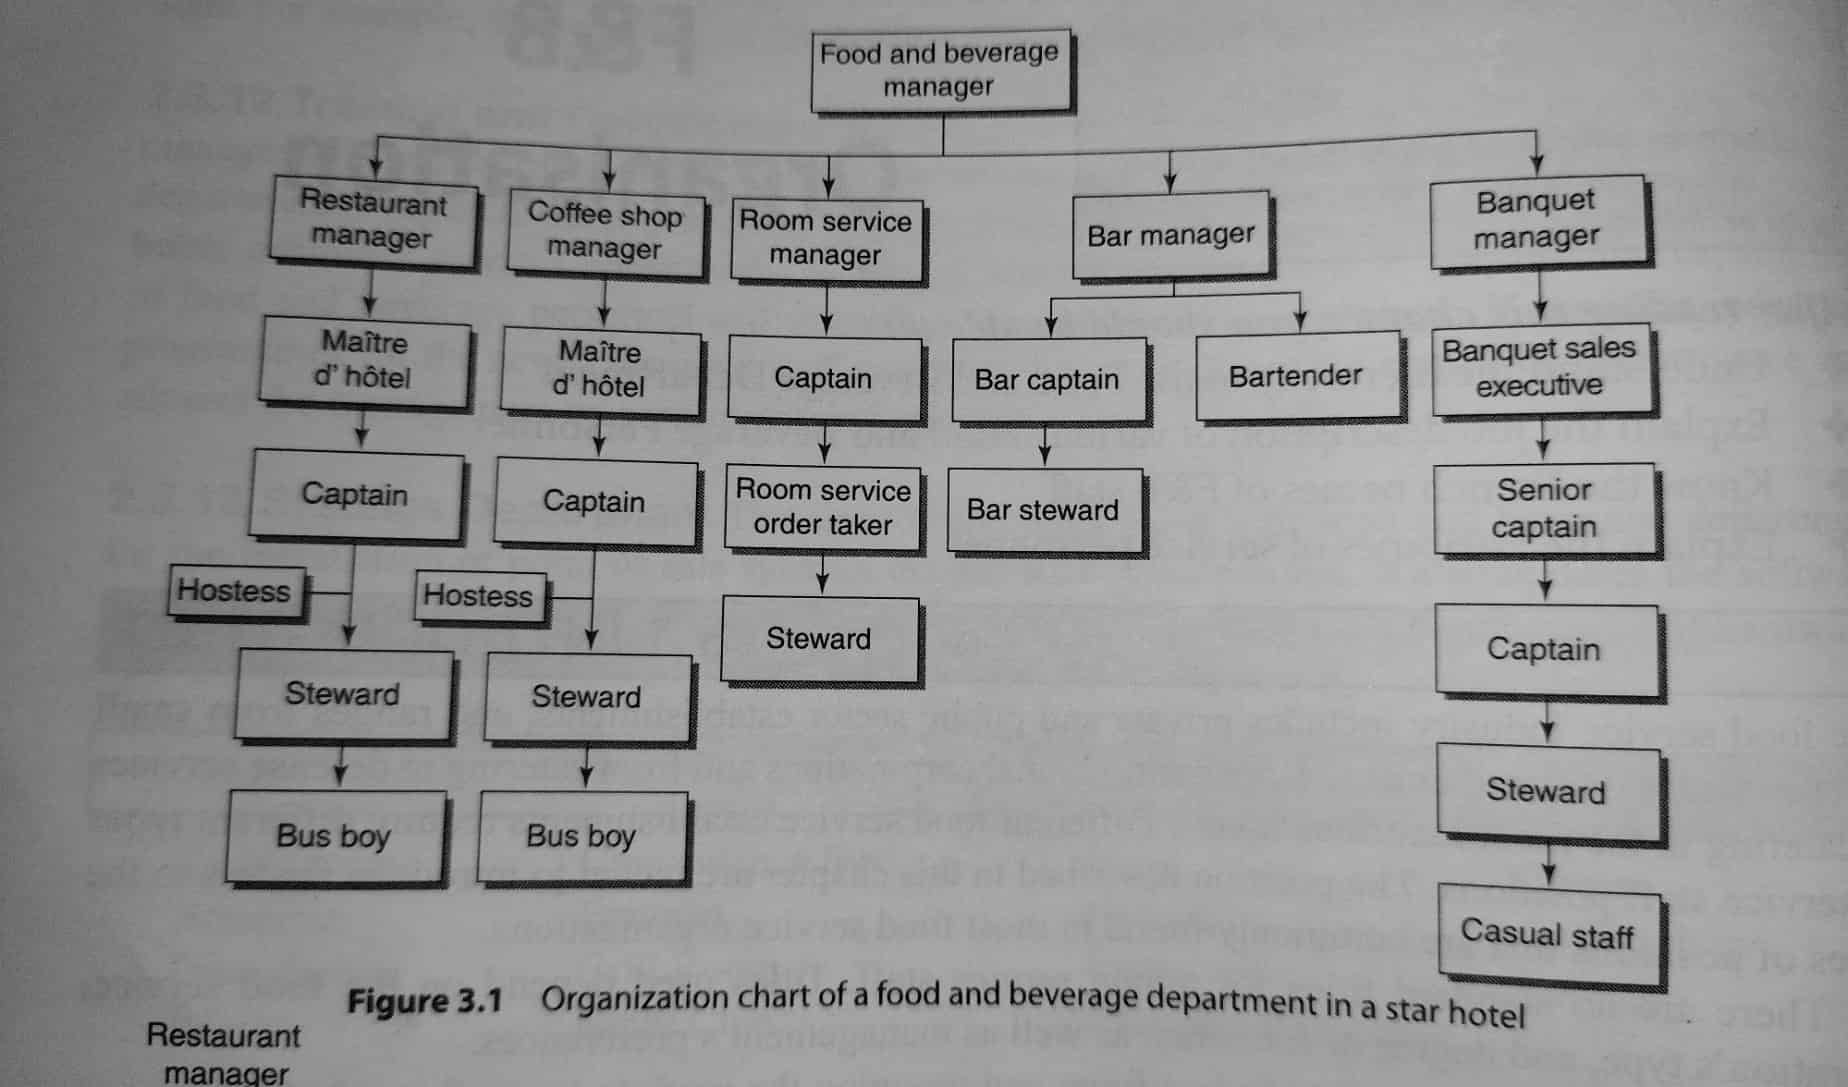 Organization Chart of A Food and beverage department in a star hotel